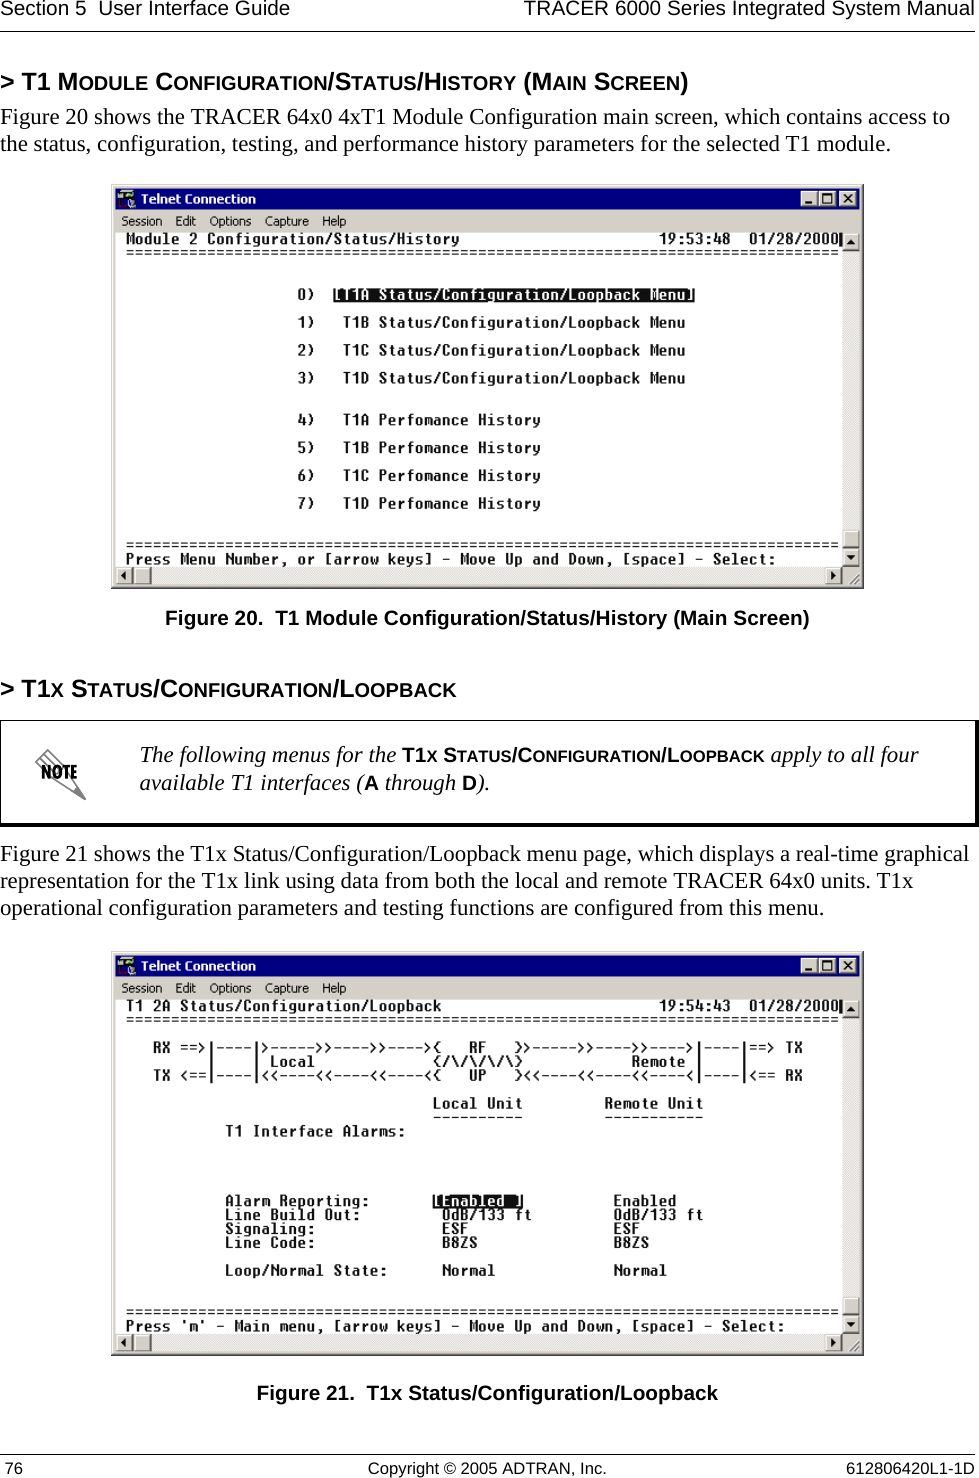 Section 5  User Interface Guide TRACER 6000 Series Integrated System Manual 76 Copyright © 2005 ADTRAN, Inc. 612806420L1-1D&gt; T1 MODULE CONFIGURATION/STATUS/HISTORY (MAIN SCREEN)Figure 20 shows the TRACER 64x0 4xT1 Module Configuration main screen, which contains access to the status, configuration, testing, and performance history parameters for the selected T1 module.Figure 20.  T1 Module Configuration/Status/History (Main Screen)&gt; T1X STATUS/CONFIGURATION/LOOPBACKFigure 21 shows the T1x Status/Configuration/Loopback menu page, which displays a real-time graphical representation for the T1x link using data from both the local and remote TRACER 64x0 units. T1x operational configuration parameters and testing functions are configured from this menu.Figure 21.  T1x Status/Configuration/LoopbackThe following menus for the T1X STATUS/CONFIGURATION/LOOPBACK apply to all four available T1 interfaces (A through D).